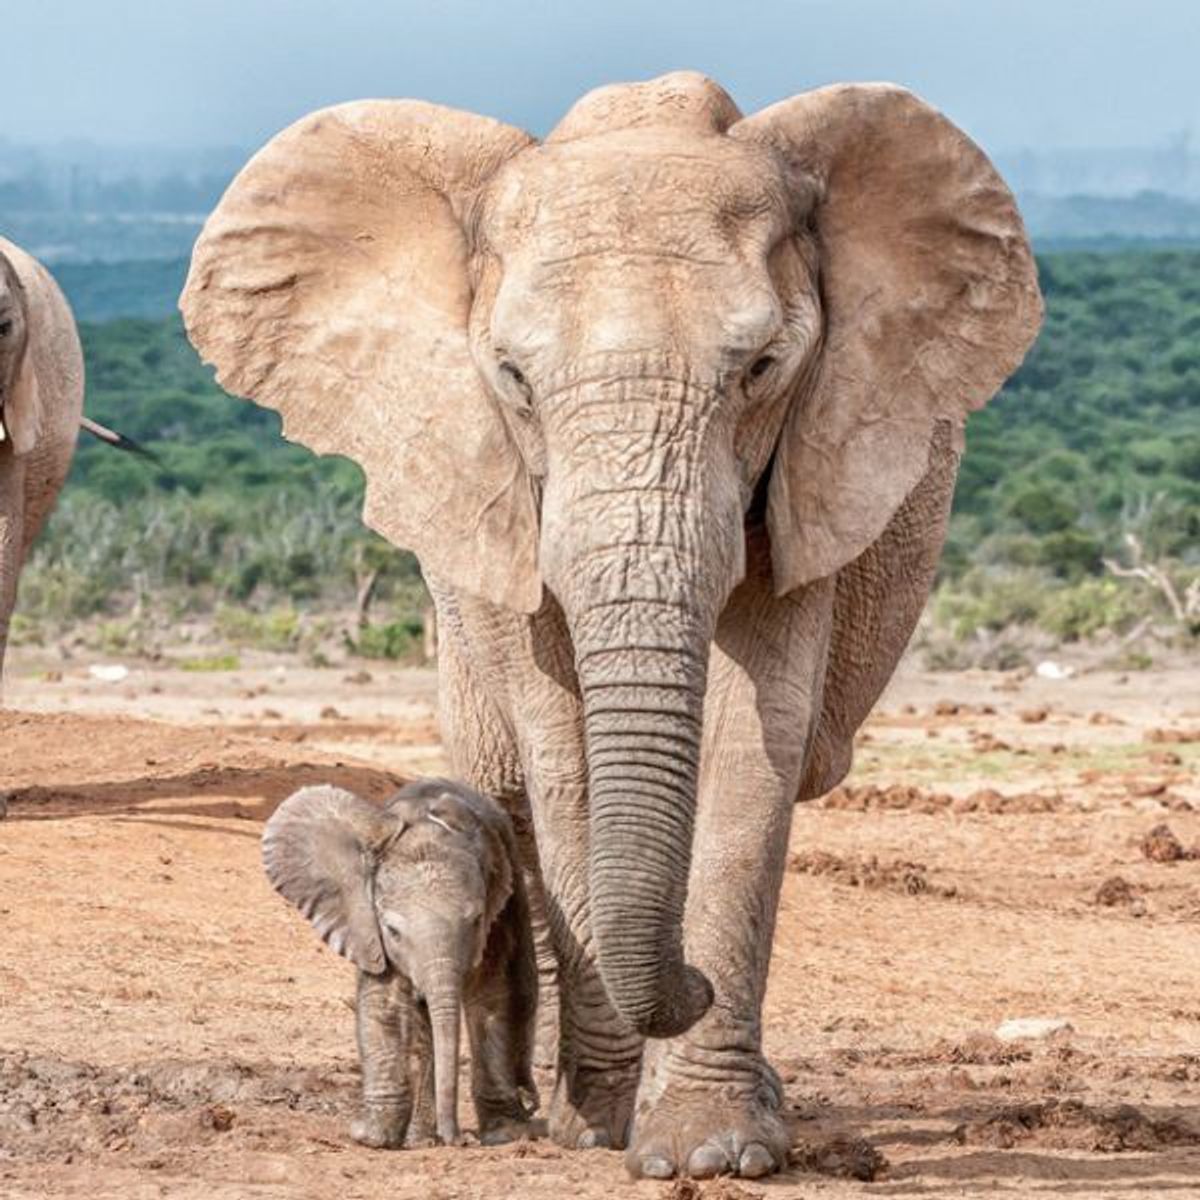 Ivory Vs. The Right To Live